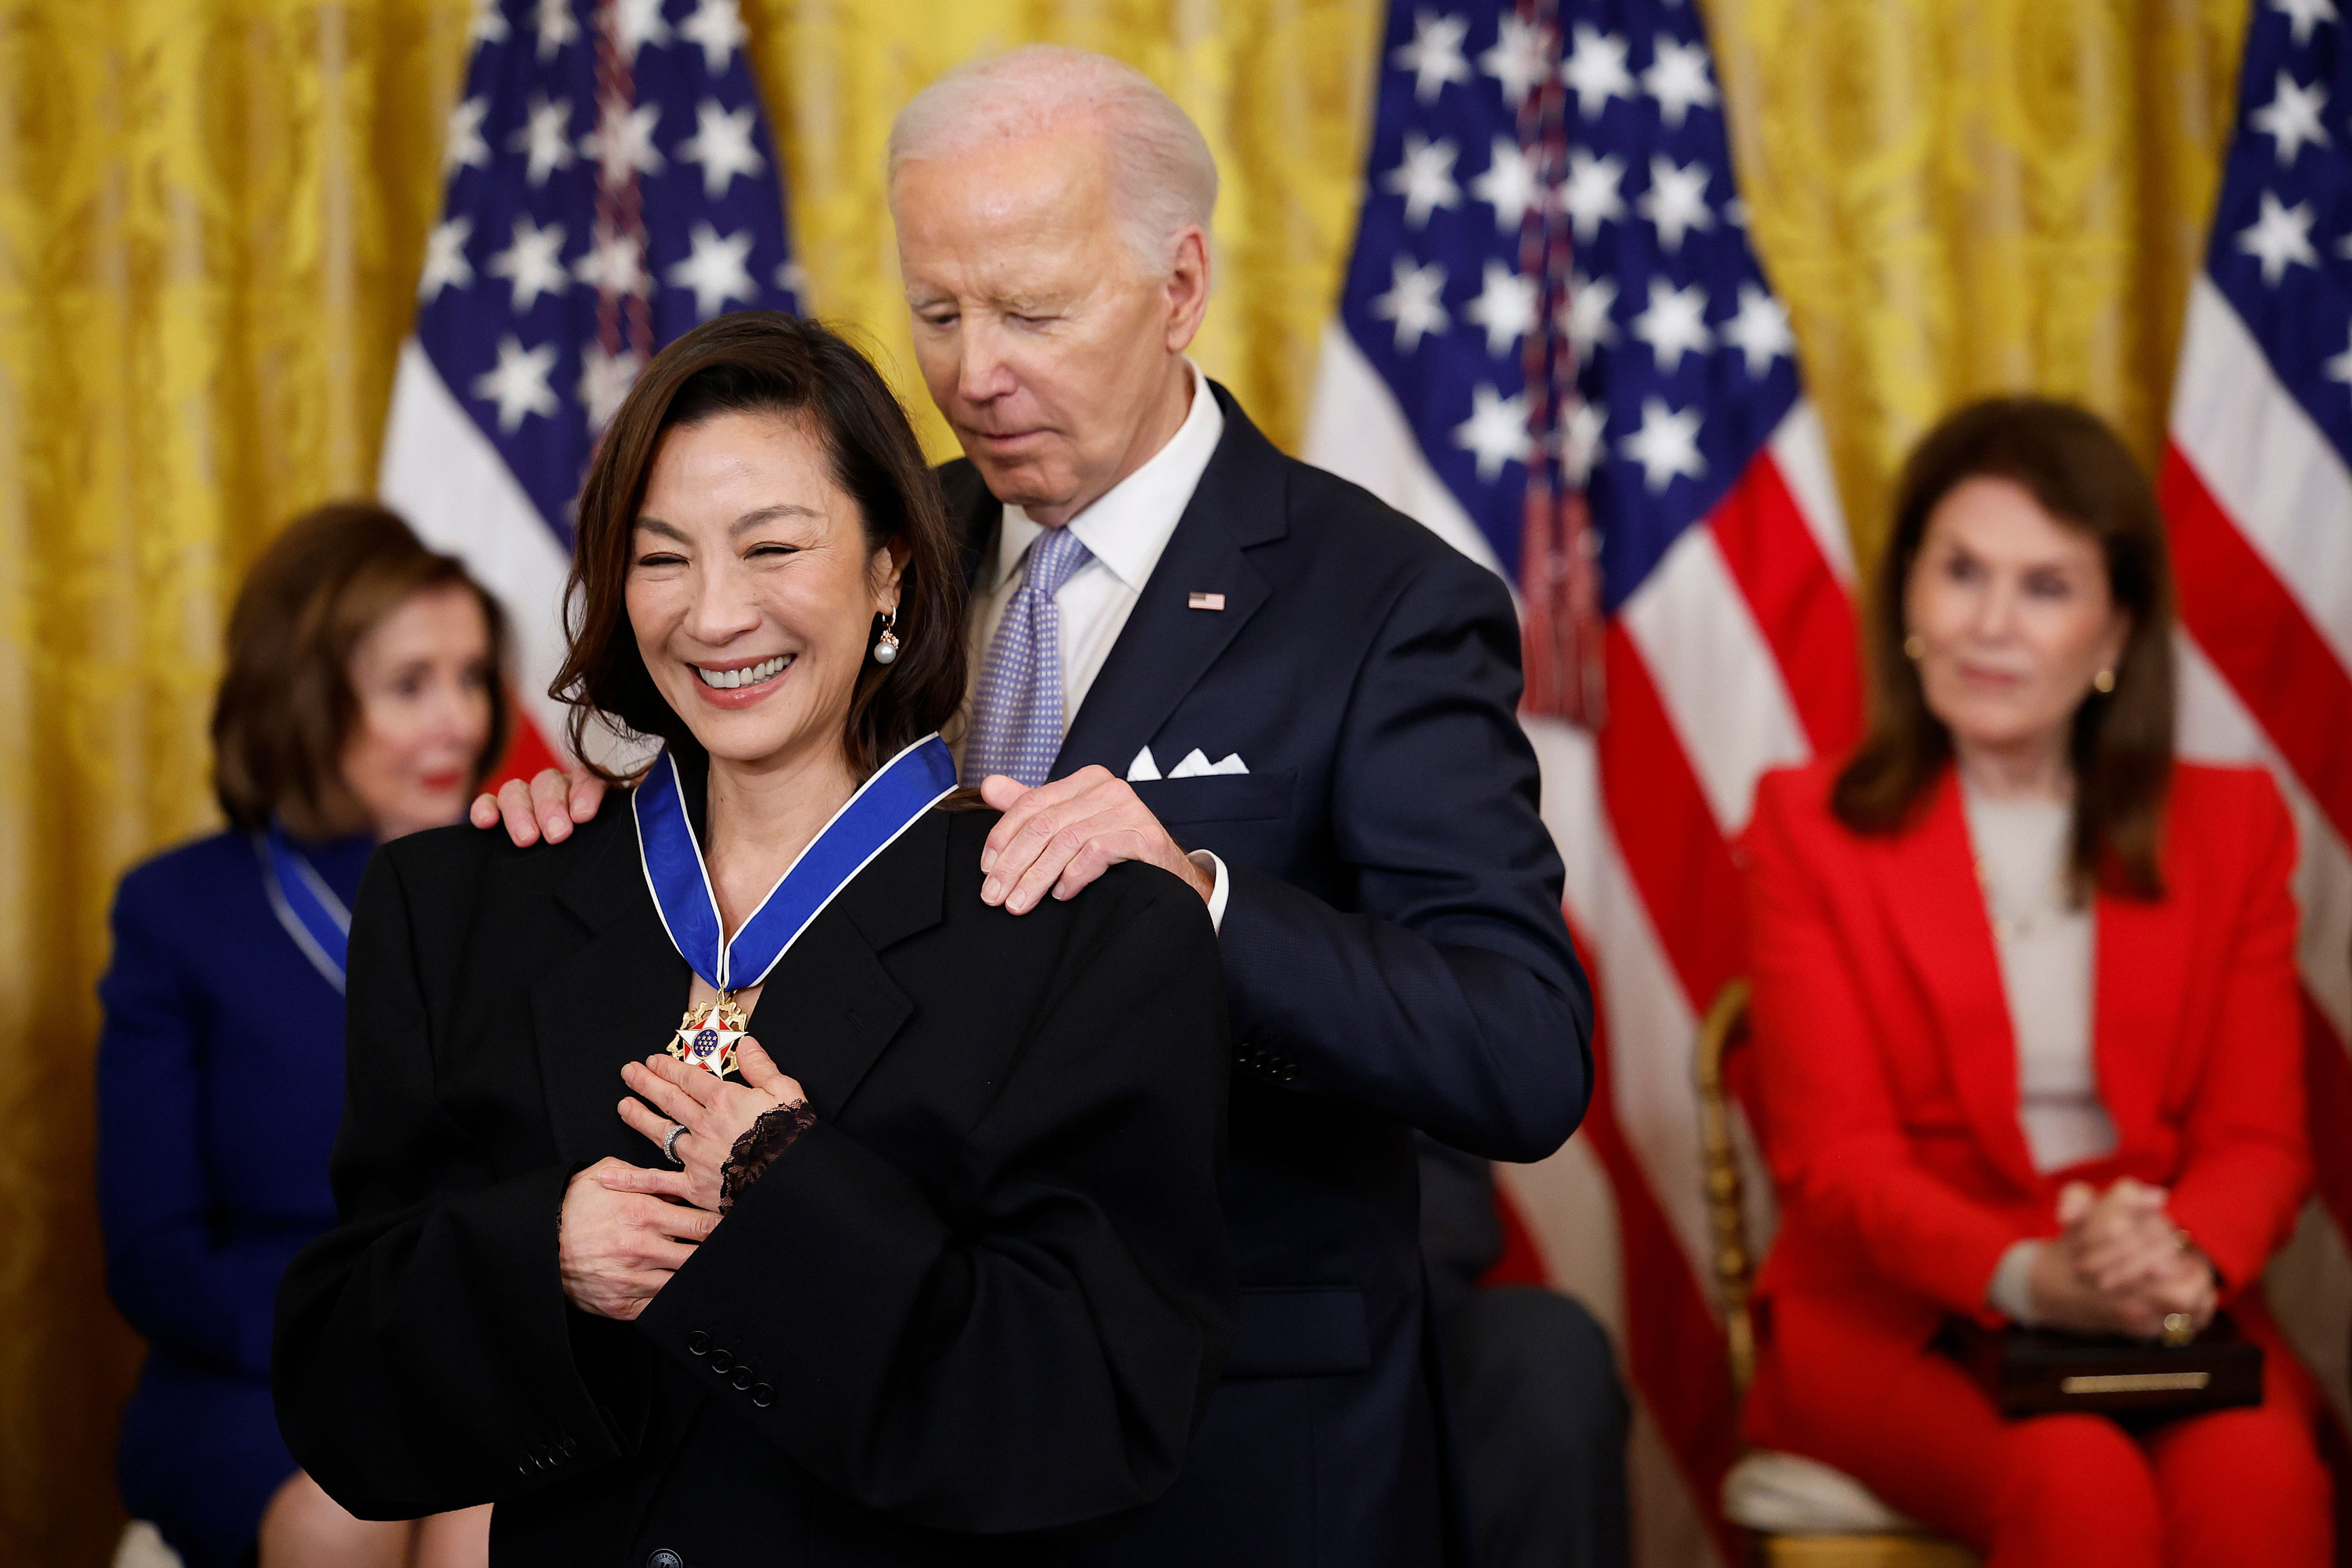 biden awards medal of freedom to 19 people including nancy pelosi, al gore and michelle yeoh